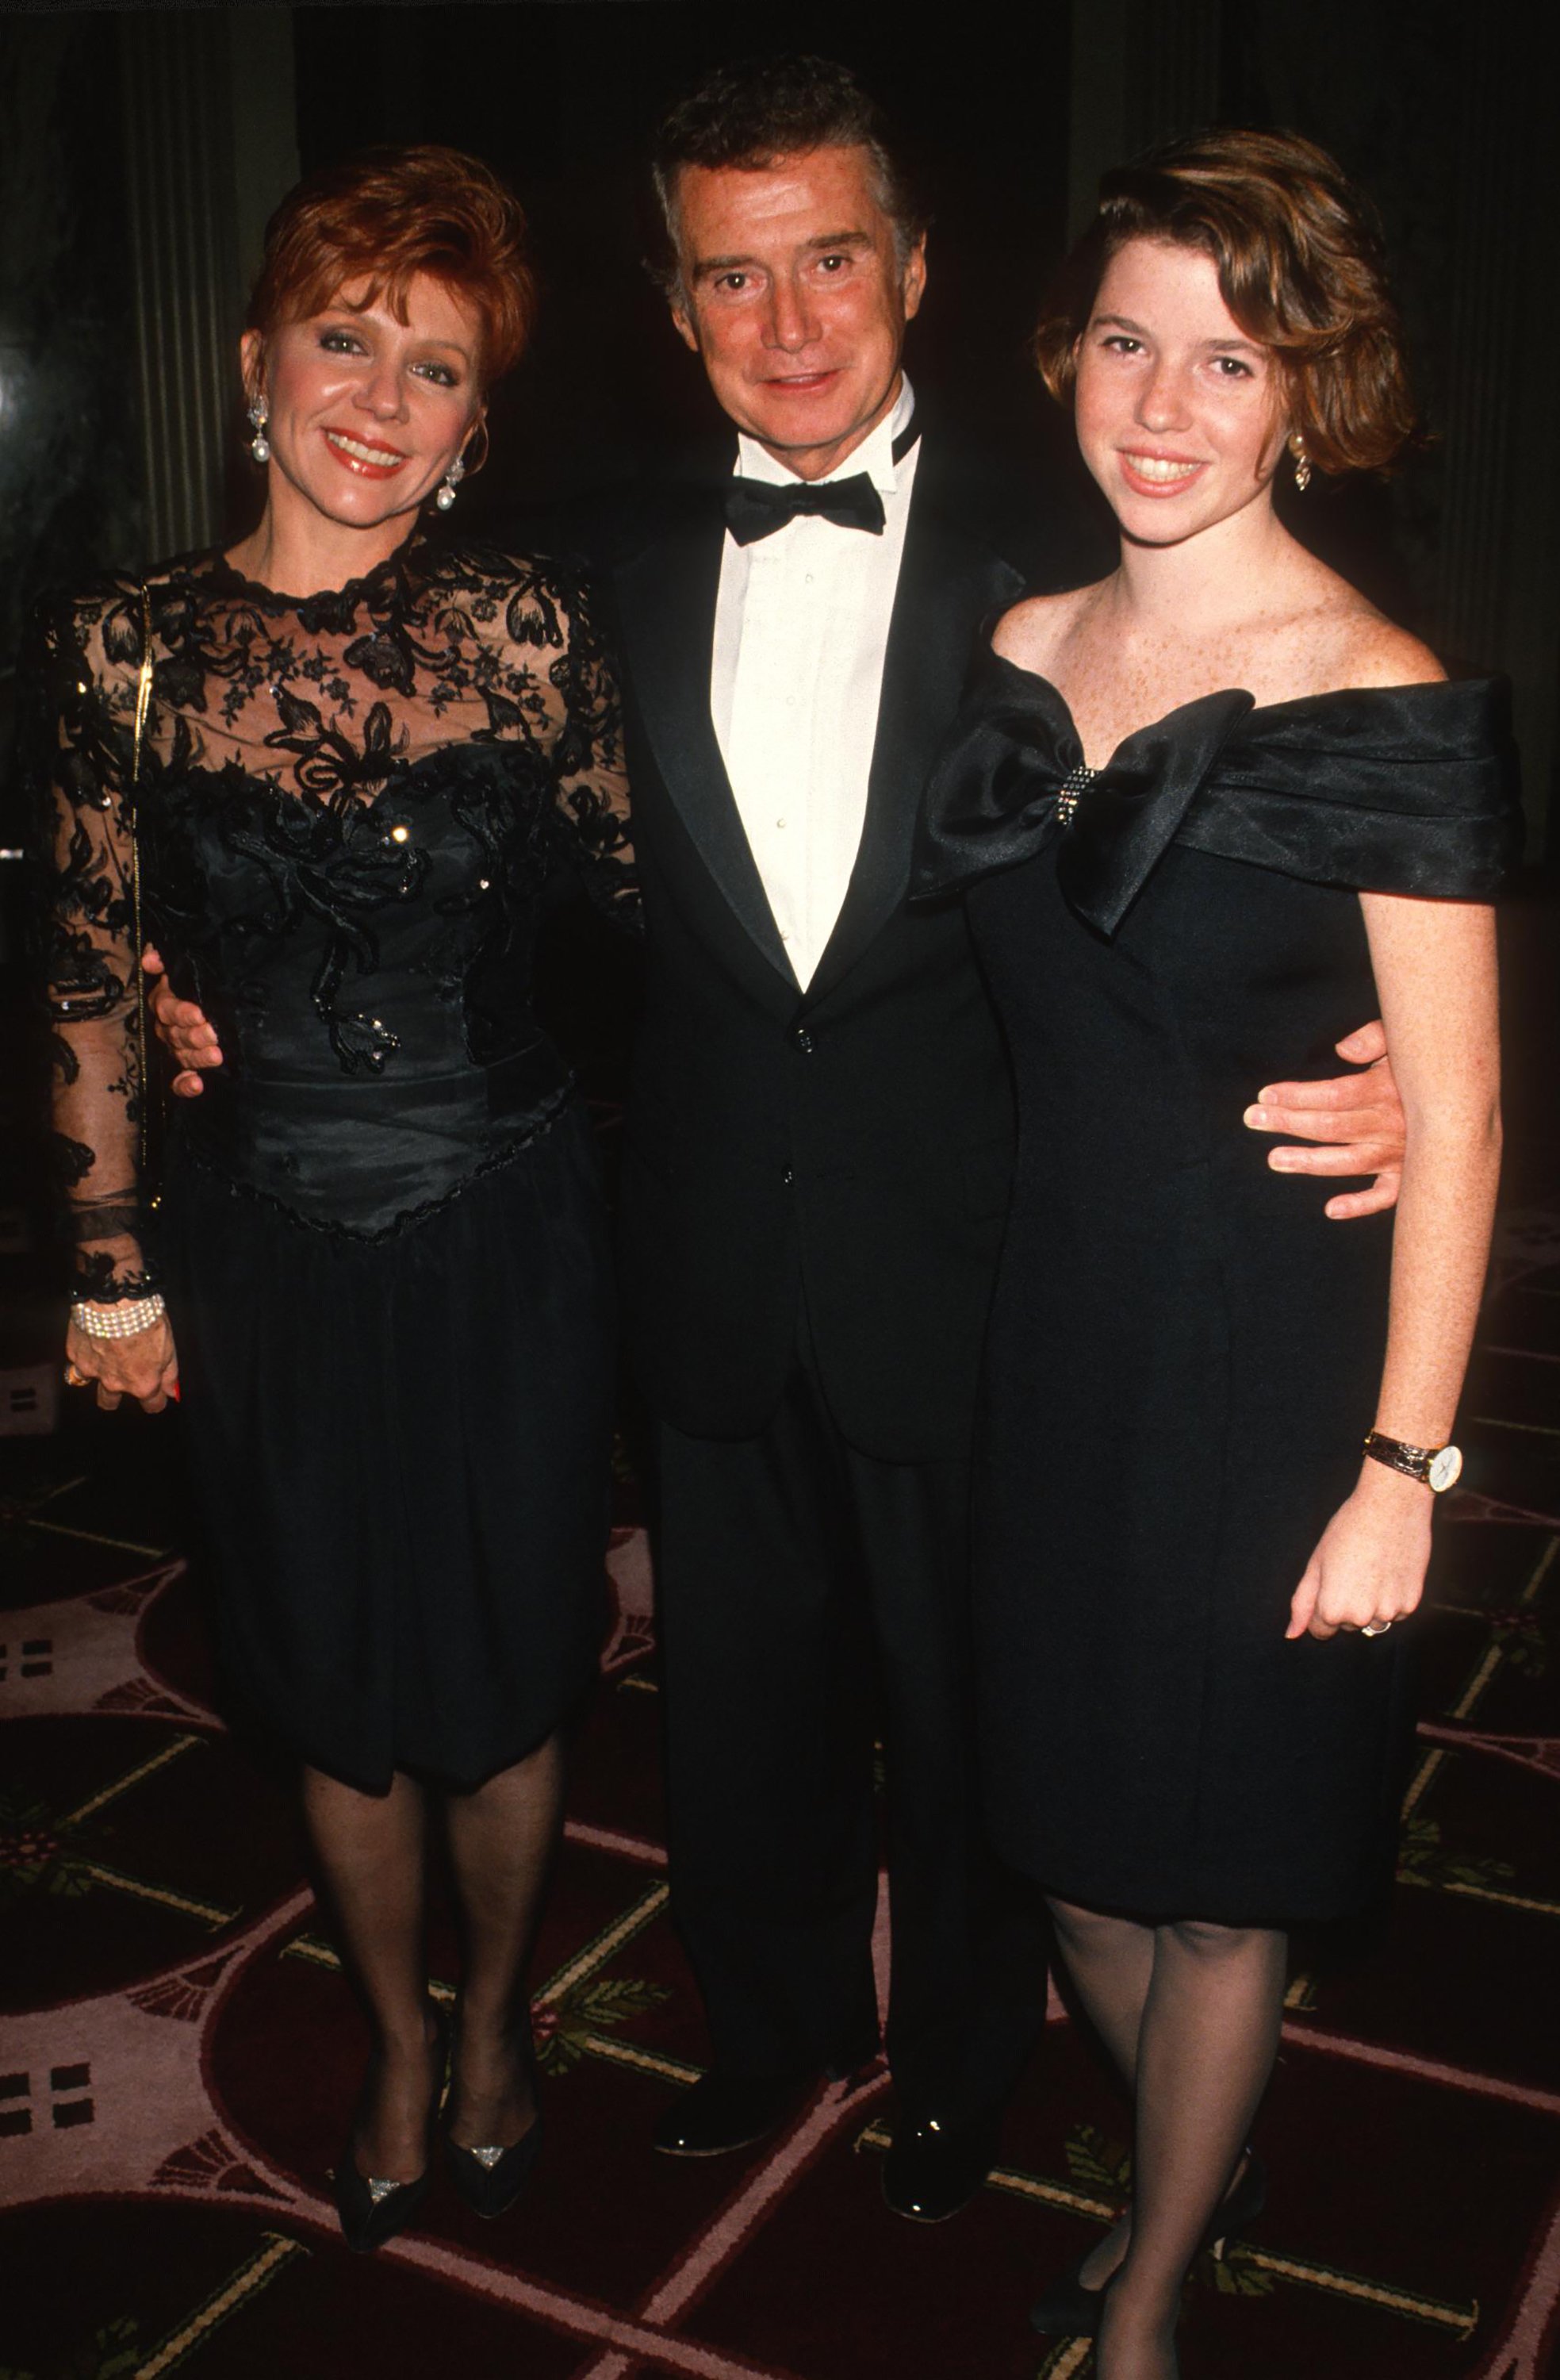 Joy Philbin, Regis Philbin, and Joanna Philbin at the American Celtic Ball in New York on October 10, 1990 | Source: Getty Images